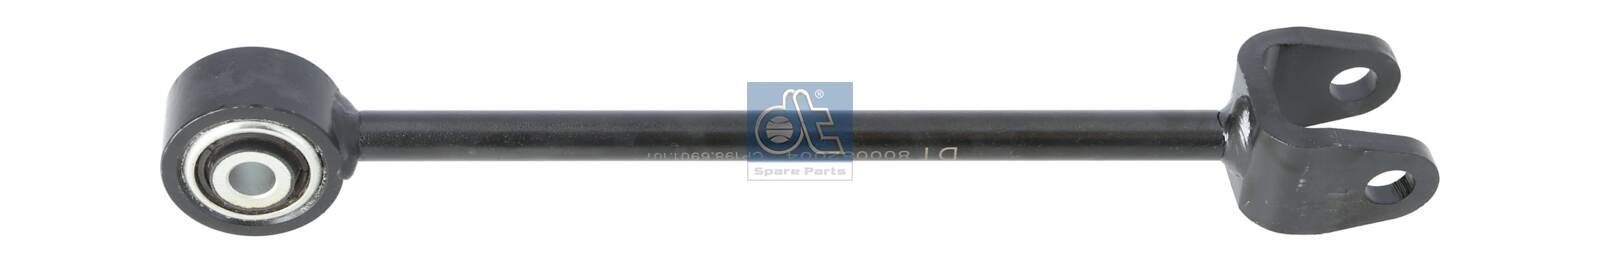 DT Spare Parts 3.67107 Anti-roll bar link 85 43718 6015